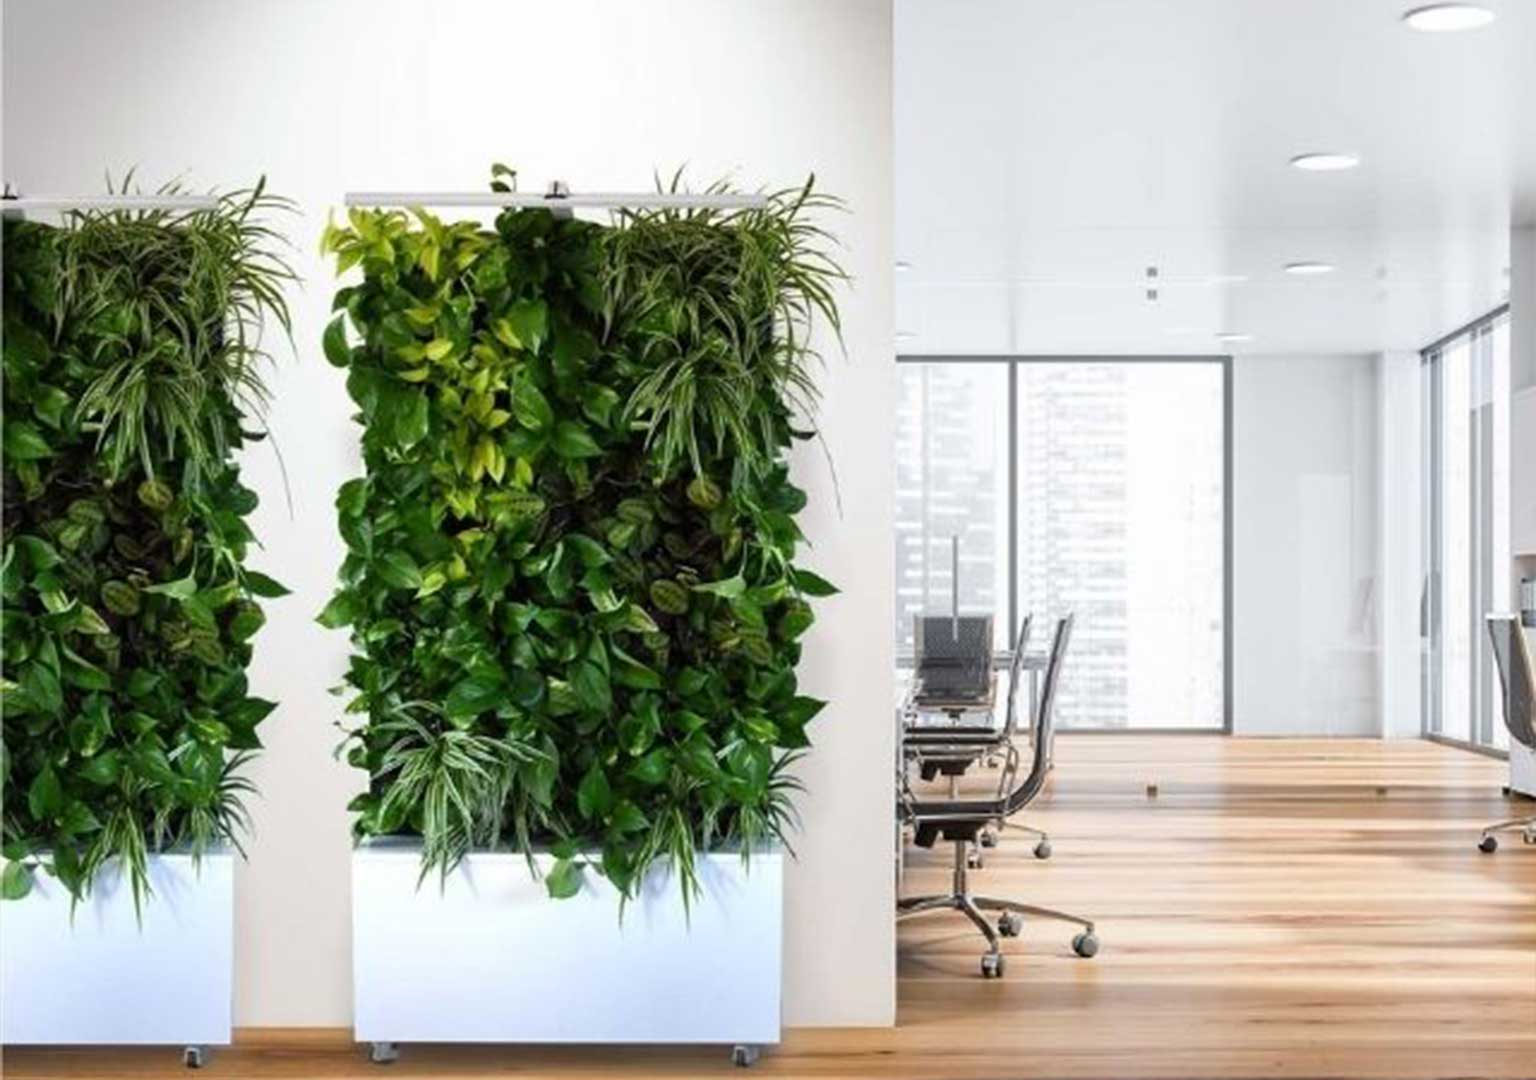 Biophilic Design in the Workplace 